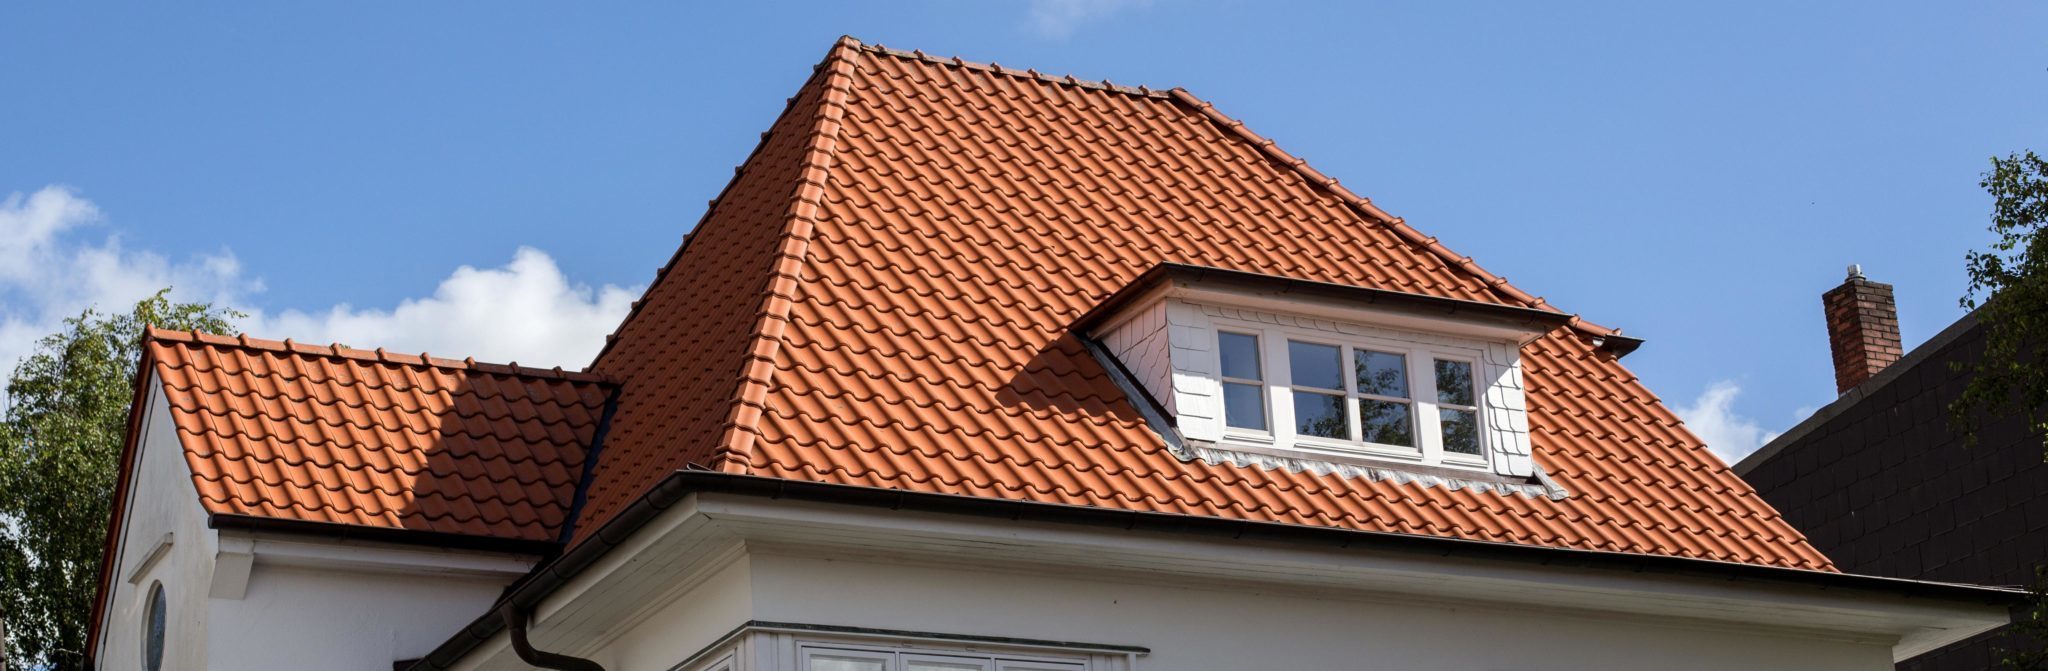 roof with curved terra cotta clay roof tiles